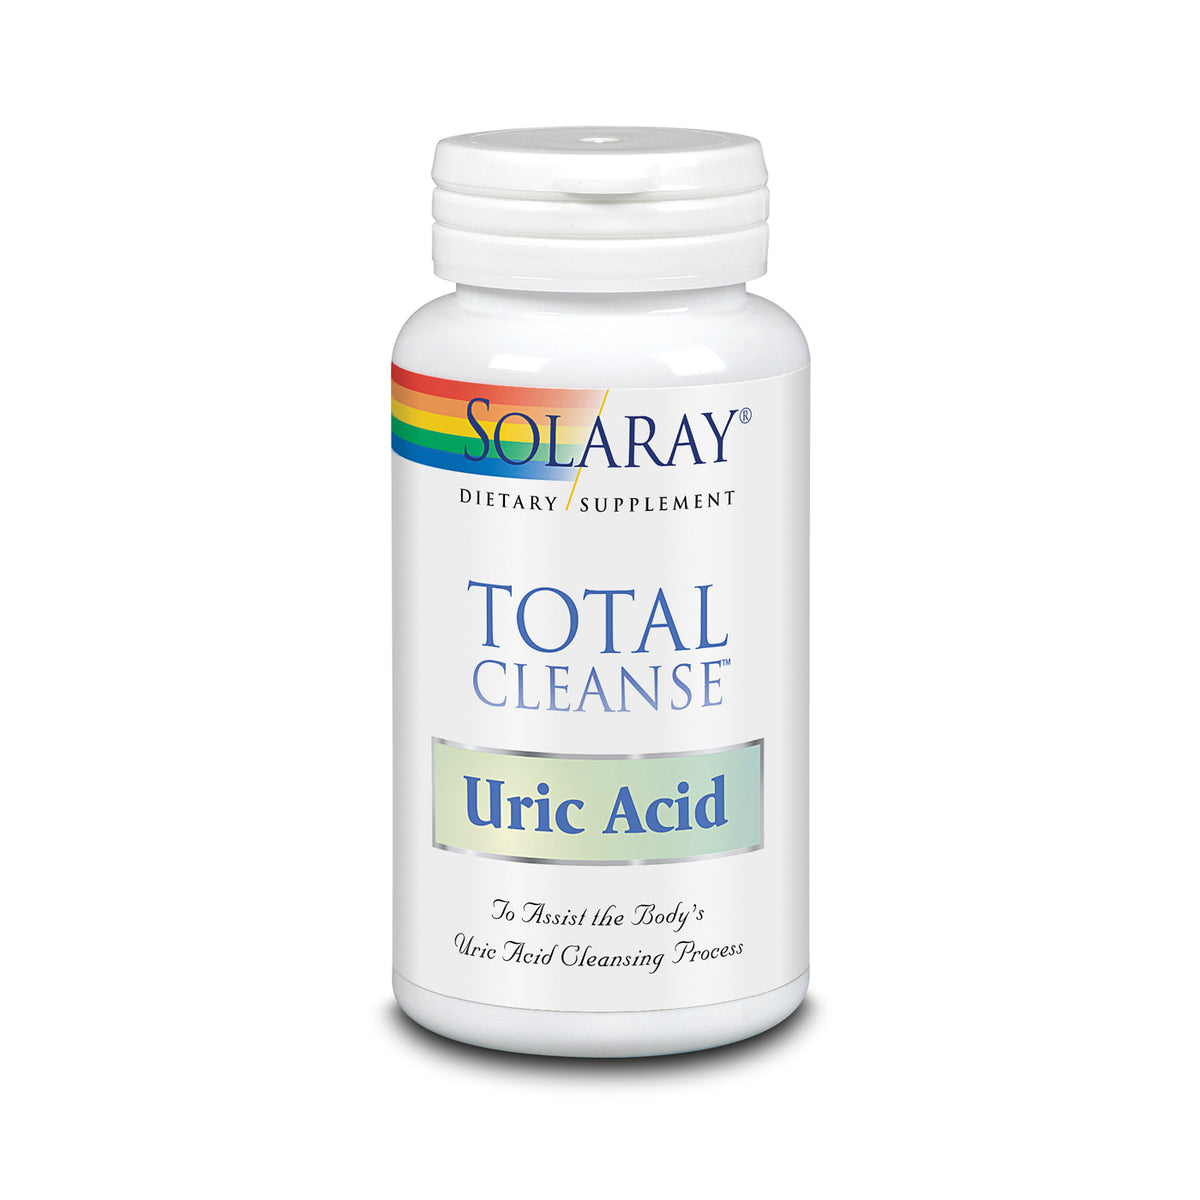 SOLARAY TOTAL CLEANSE URIC ACID